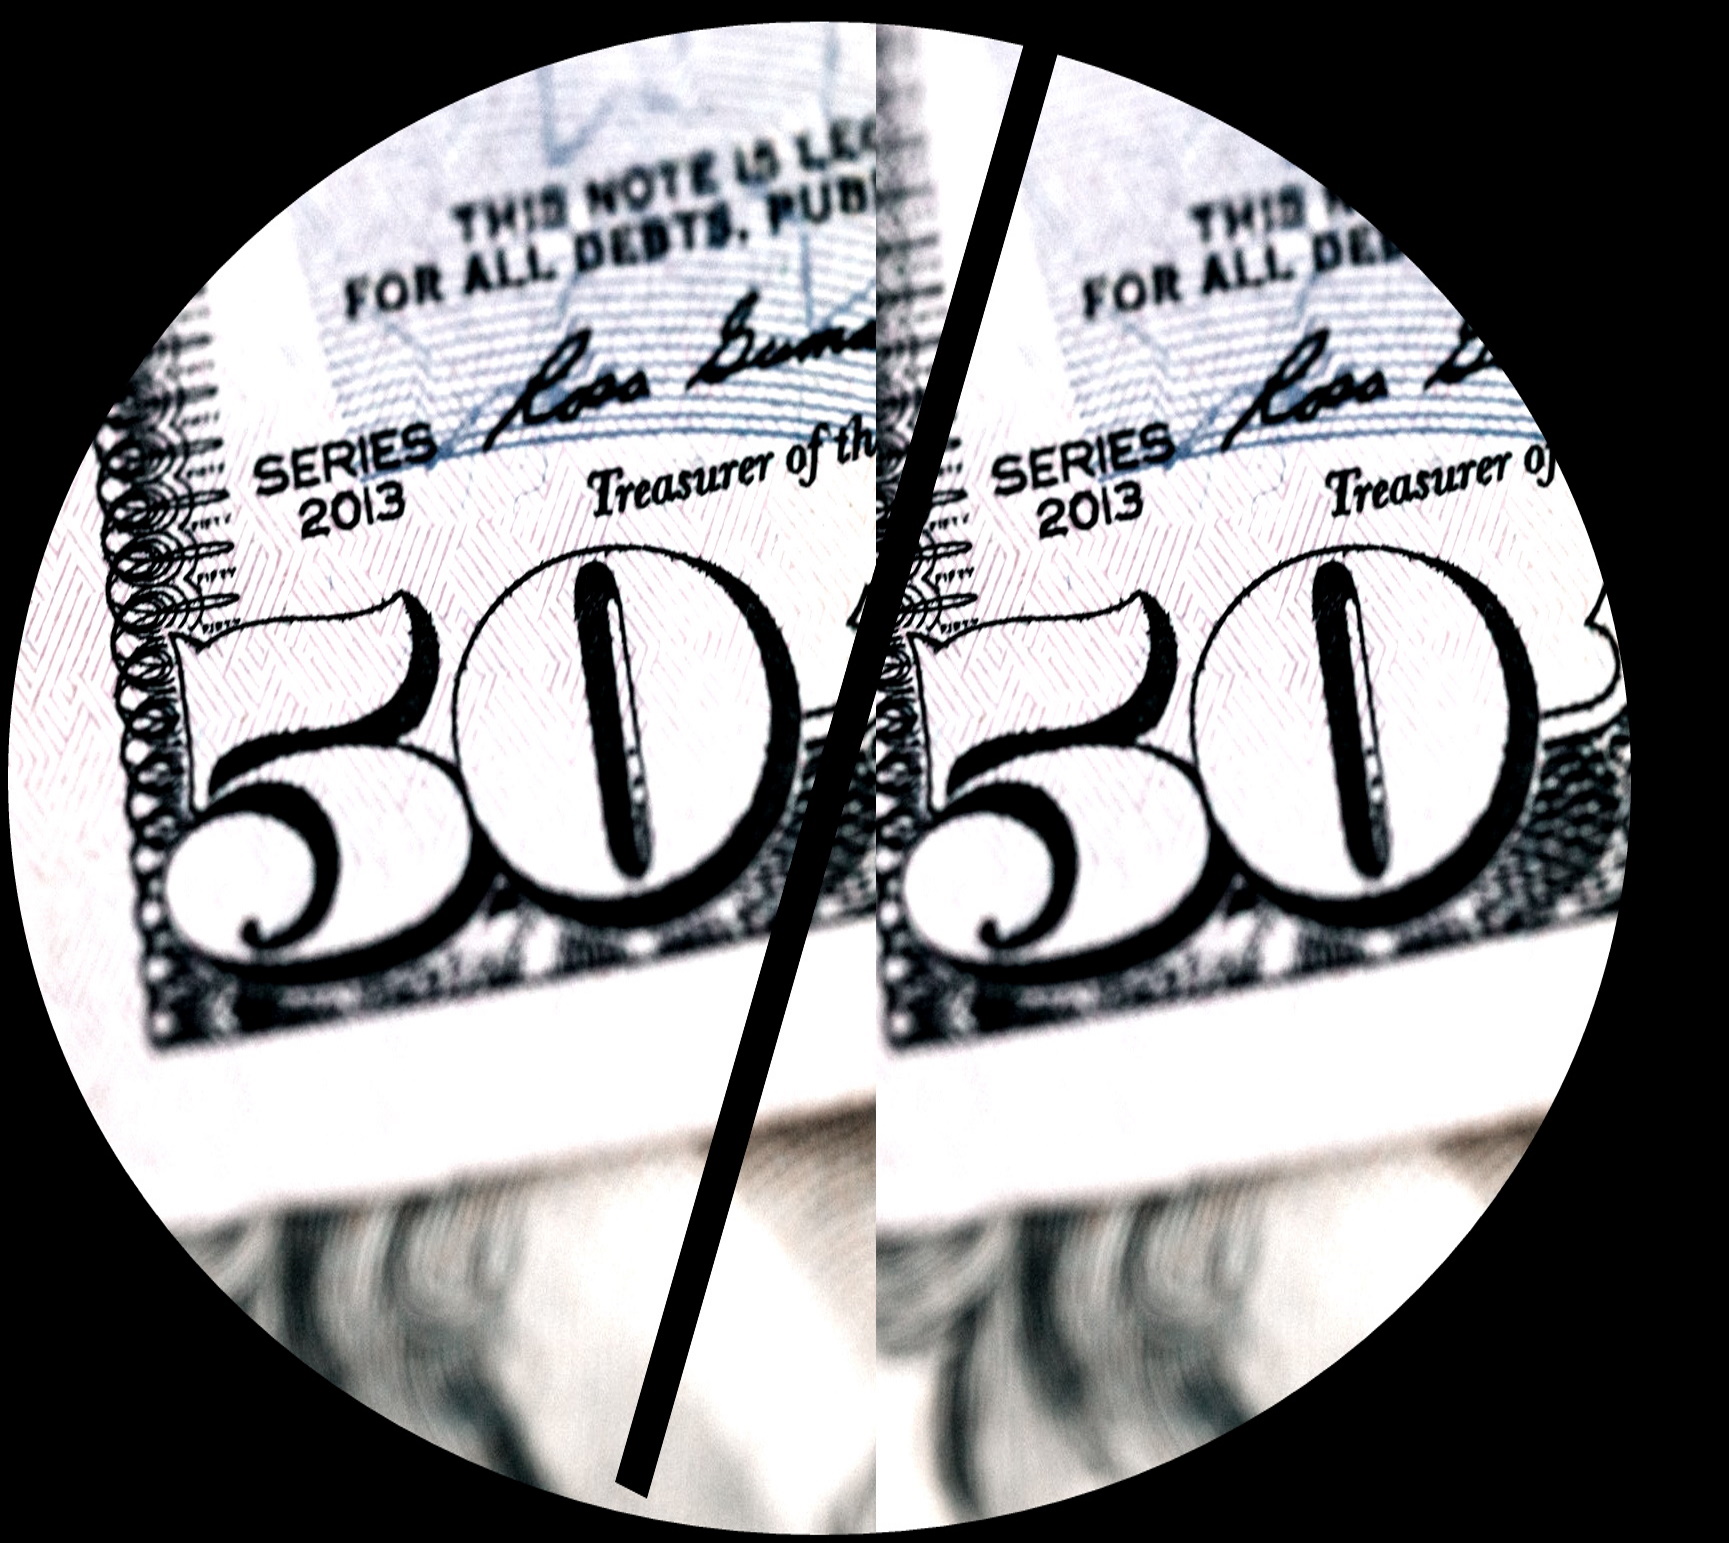 How to Fundraise with a 50/50 Raffle